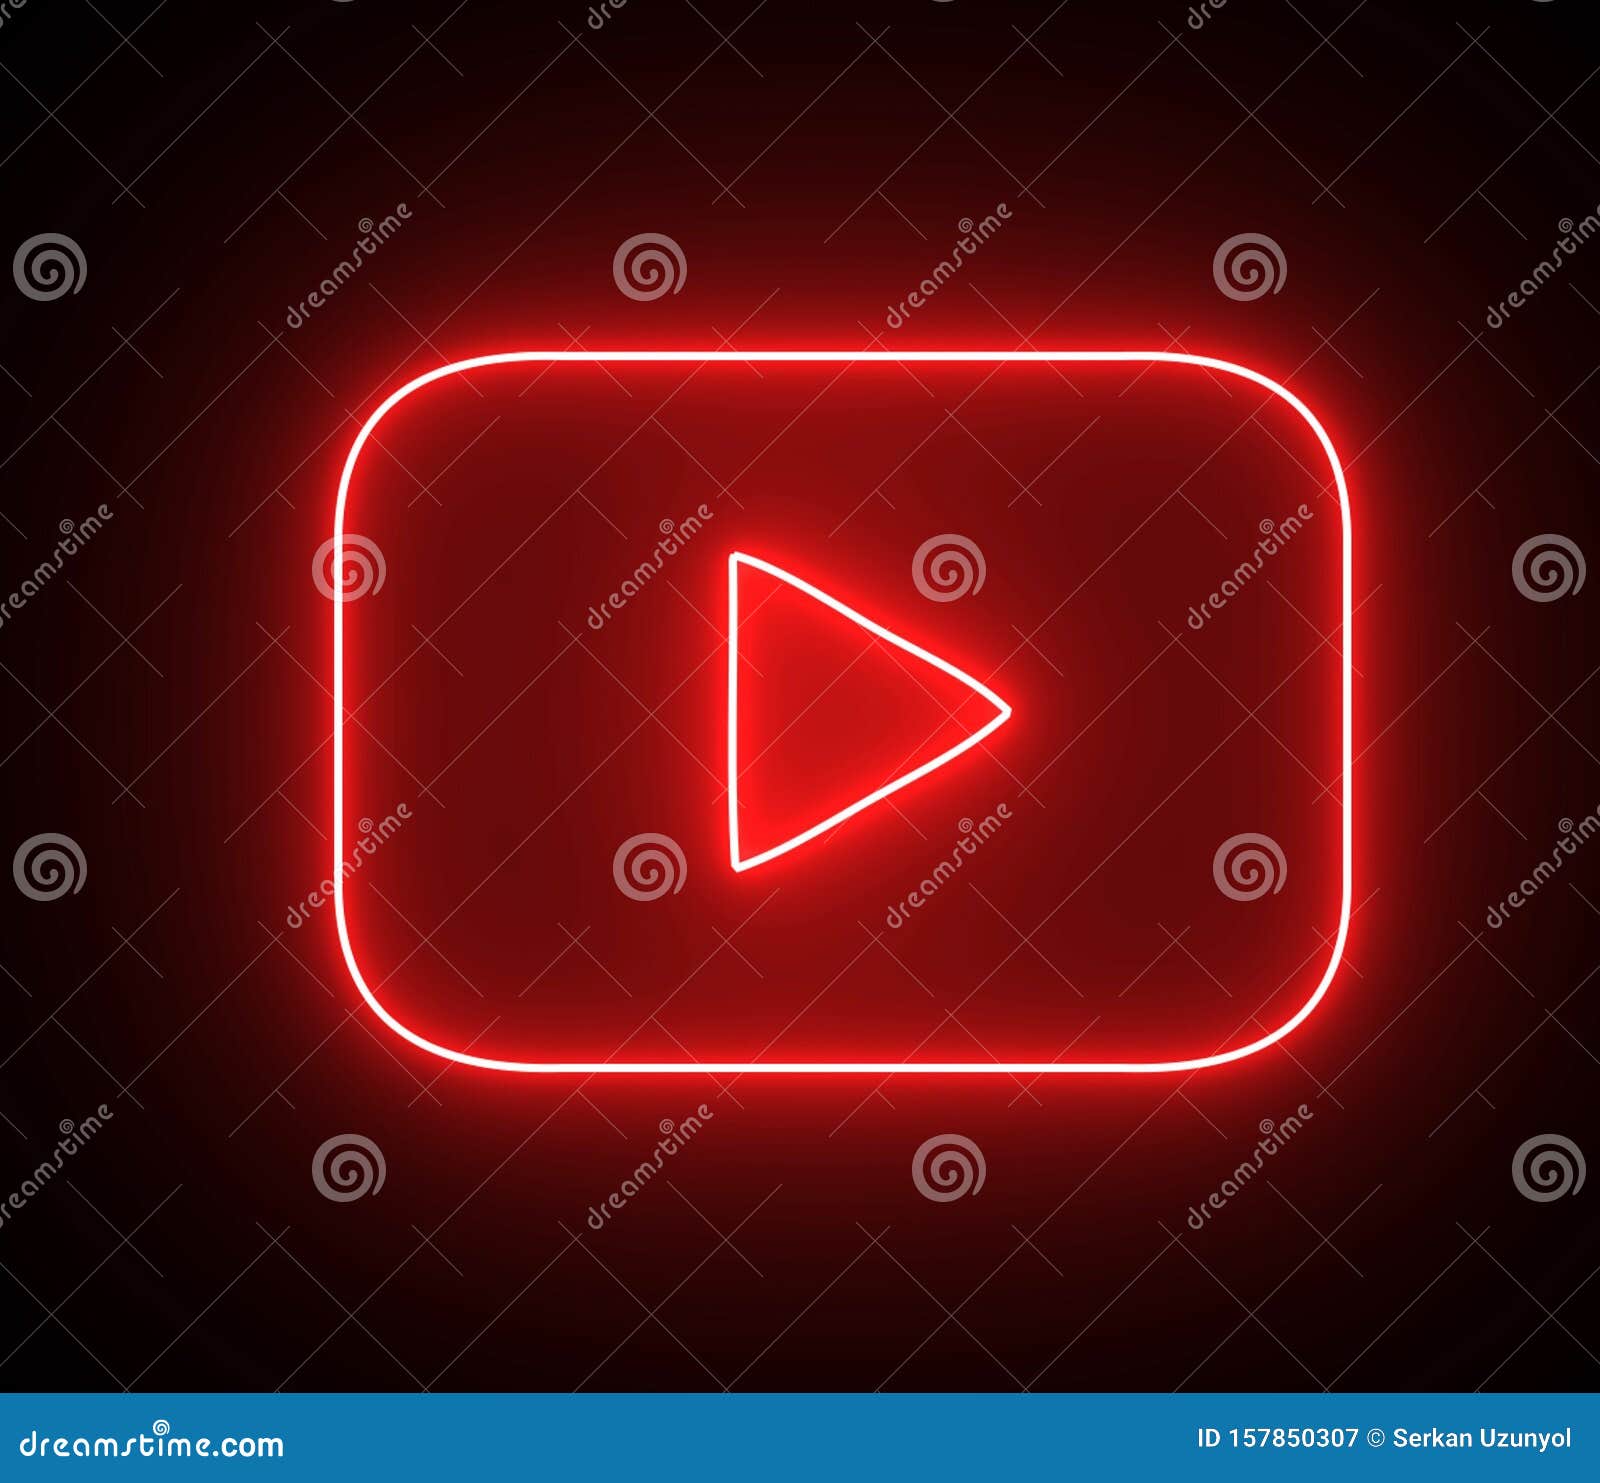 Neon Youtube Icon With Beautiful Glowing Led Light Stock Illustration Illustration Of Company Graphic